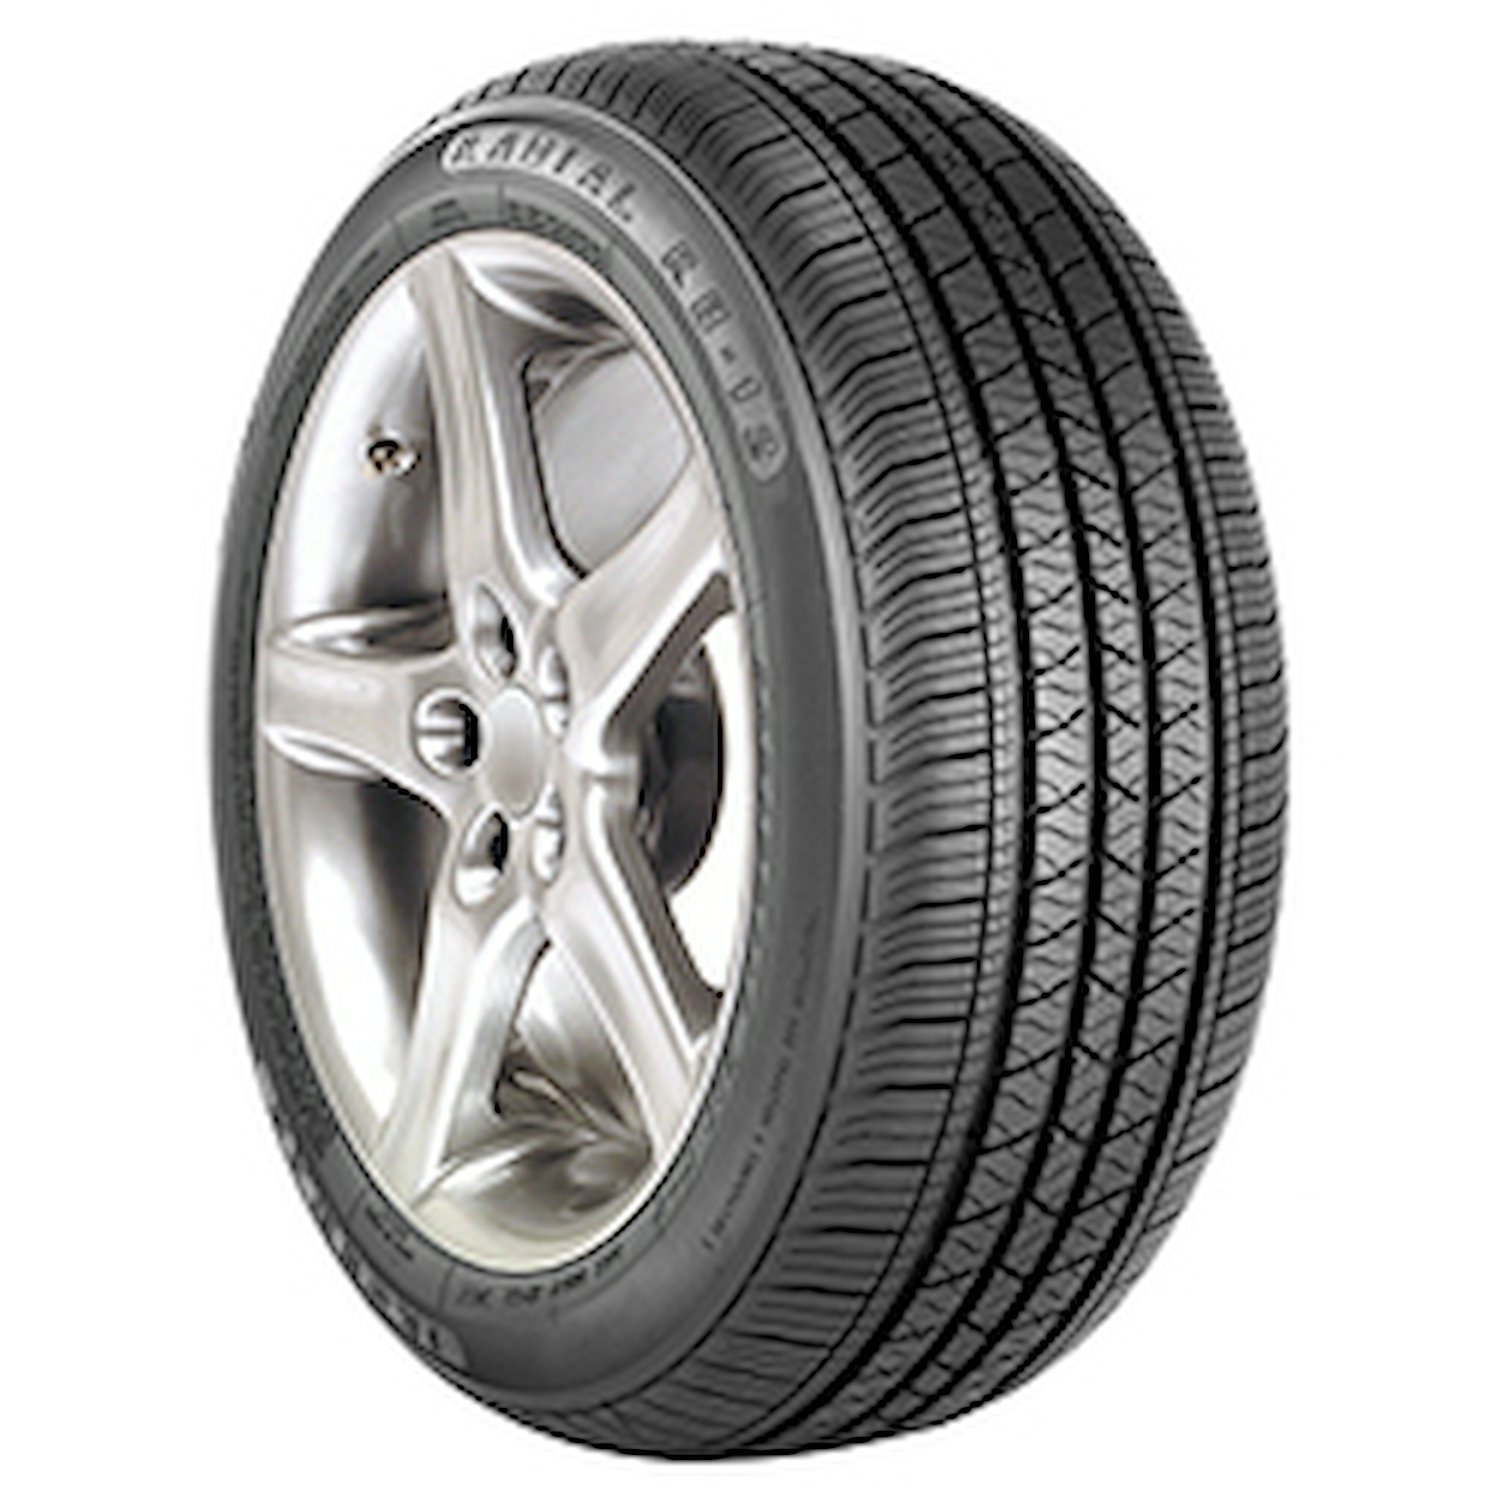 RB-12 Tire, 185/70R14 88T